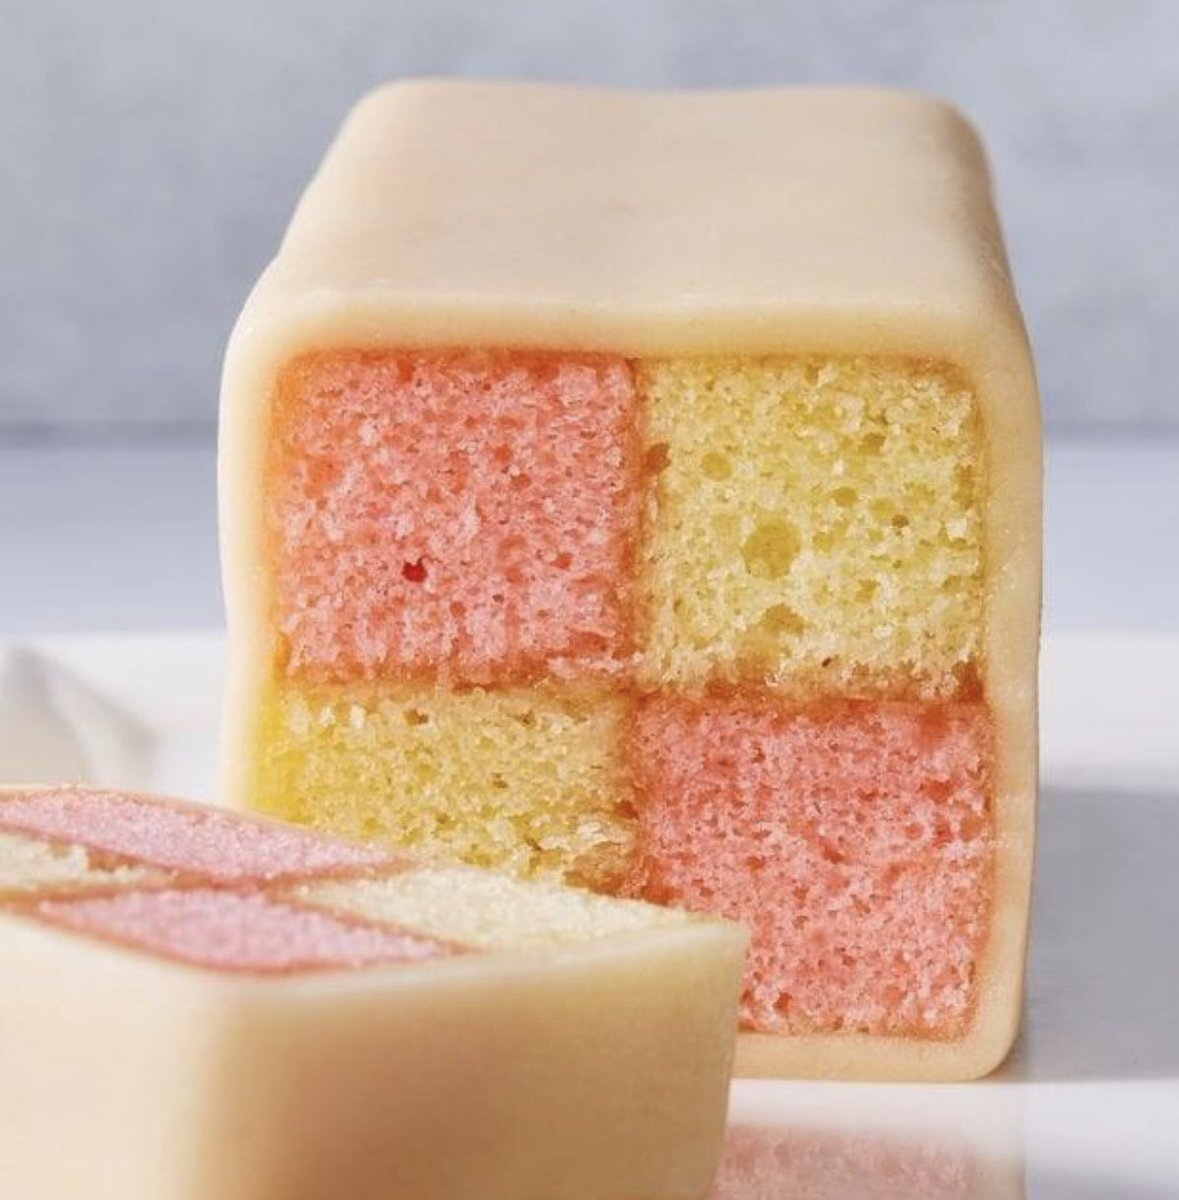 This cake was created for the wedding of Prince Louis of Battenberg and Princess Victoria the granddaughter of Queen Victoria…..do people still eat it?